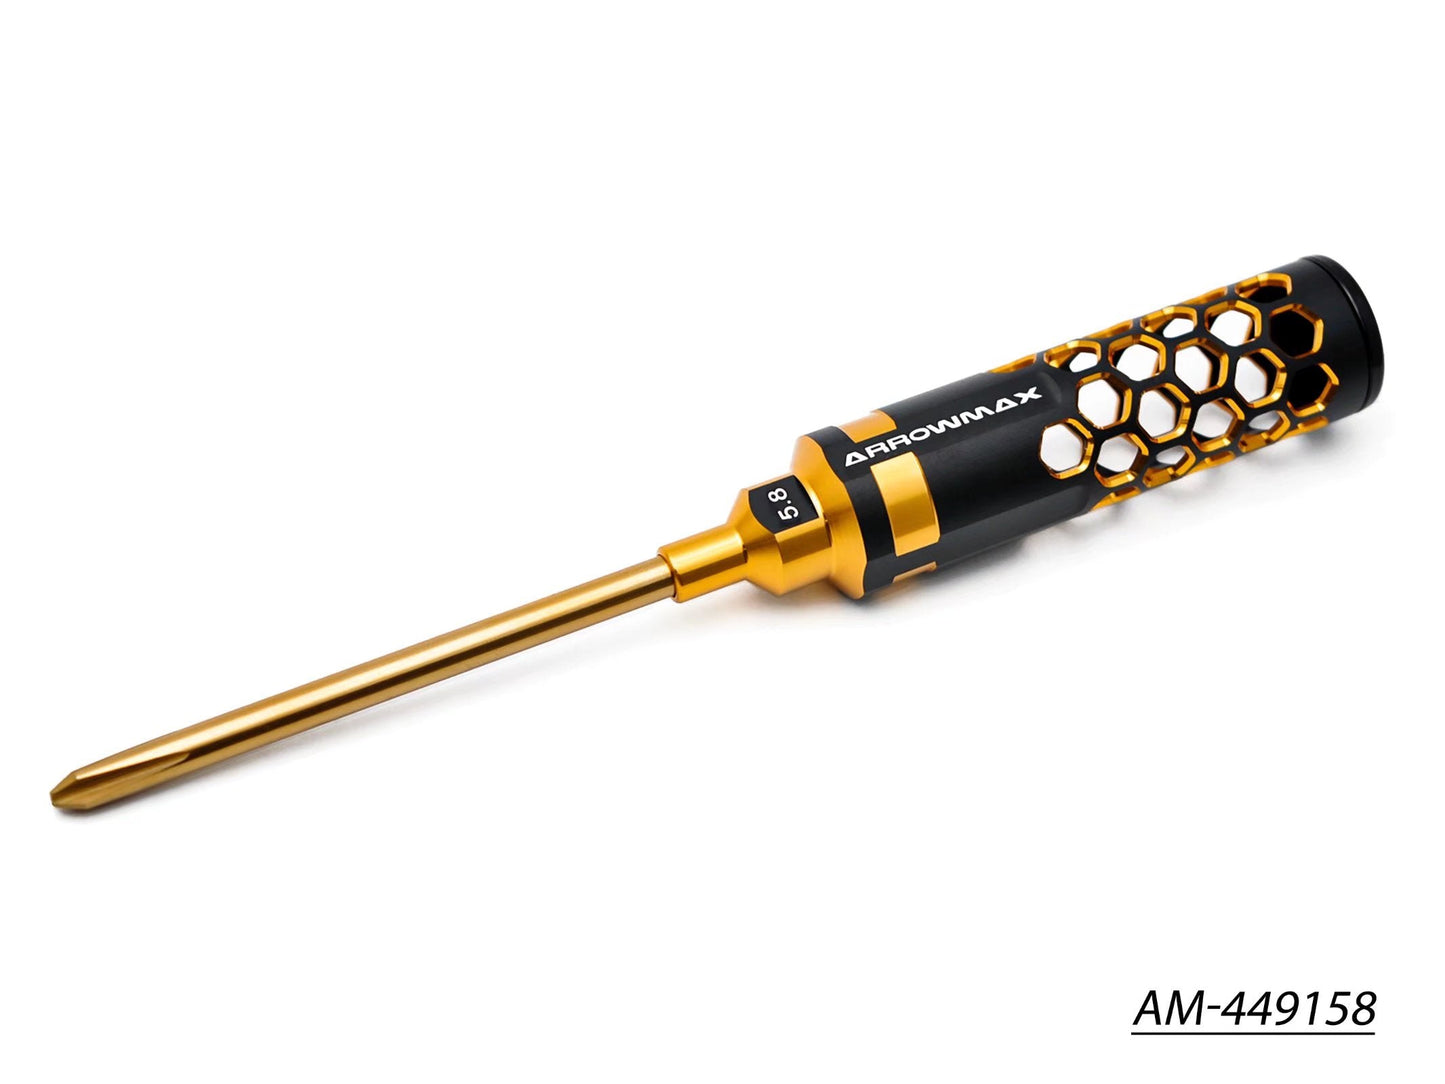 Phillips Screwdriver 5.8 X 110mm Limited Edition AM-449158